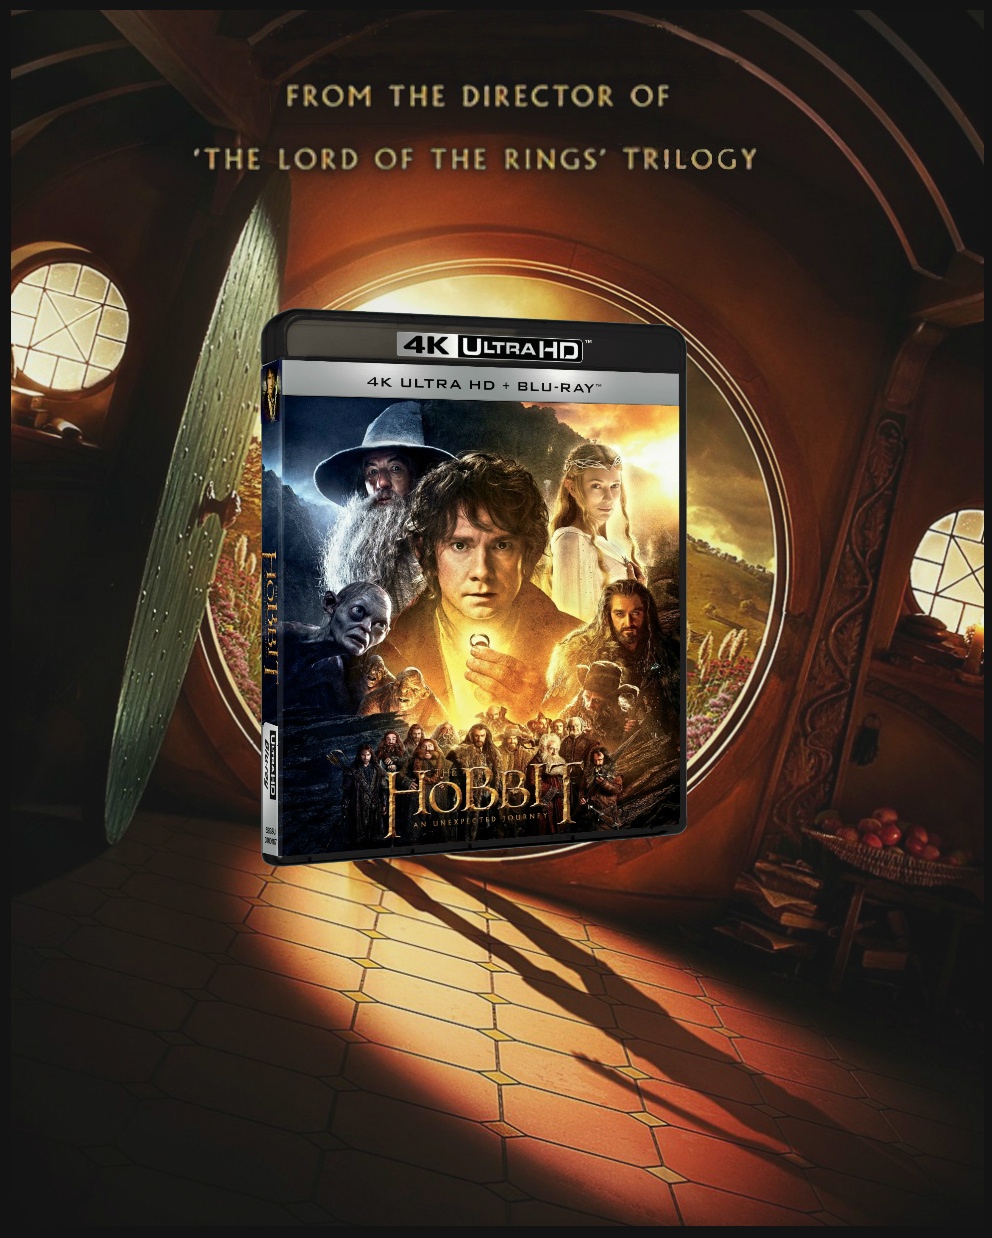 download the new The Hobbit: An Unexpected Journey